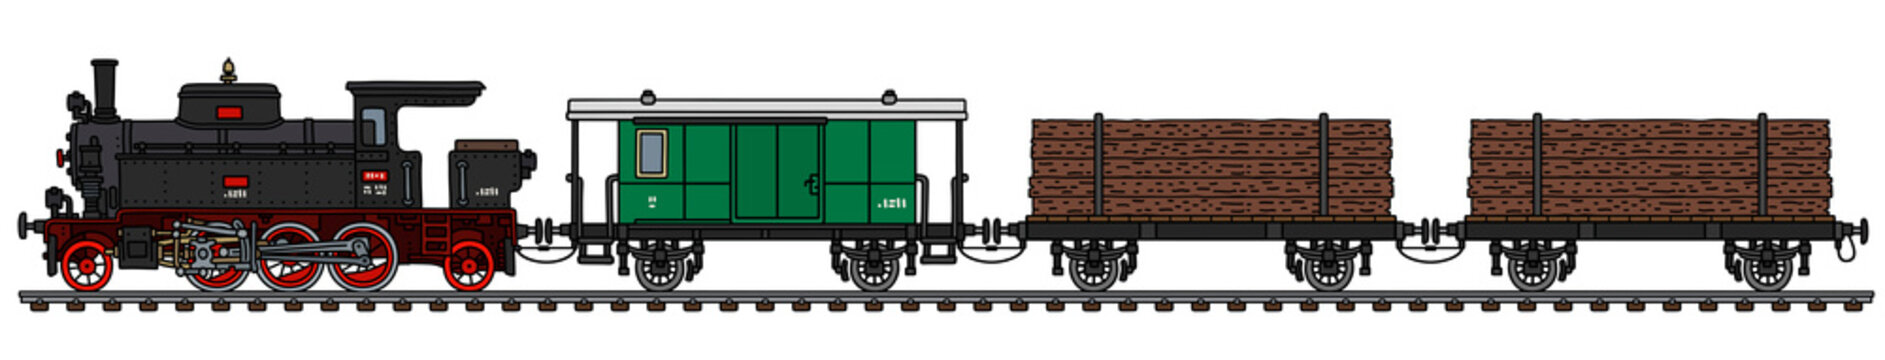 The vectorized hand drawing of a vintage timber steam train